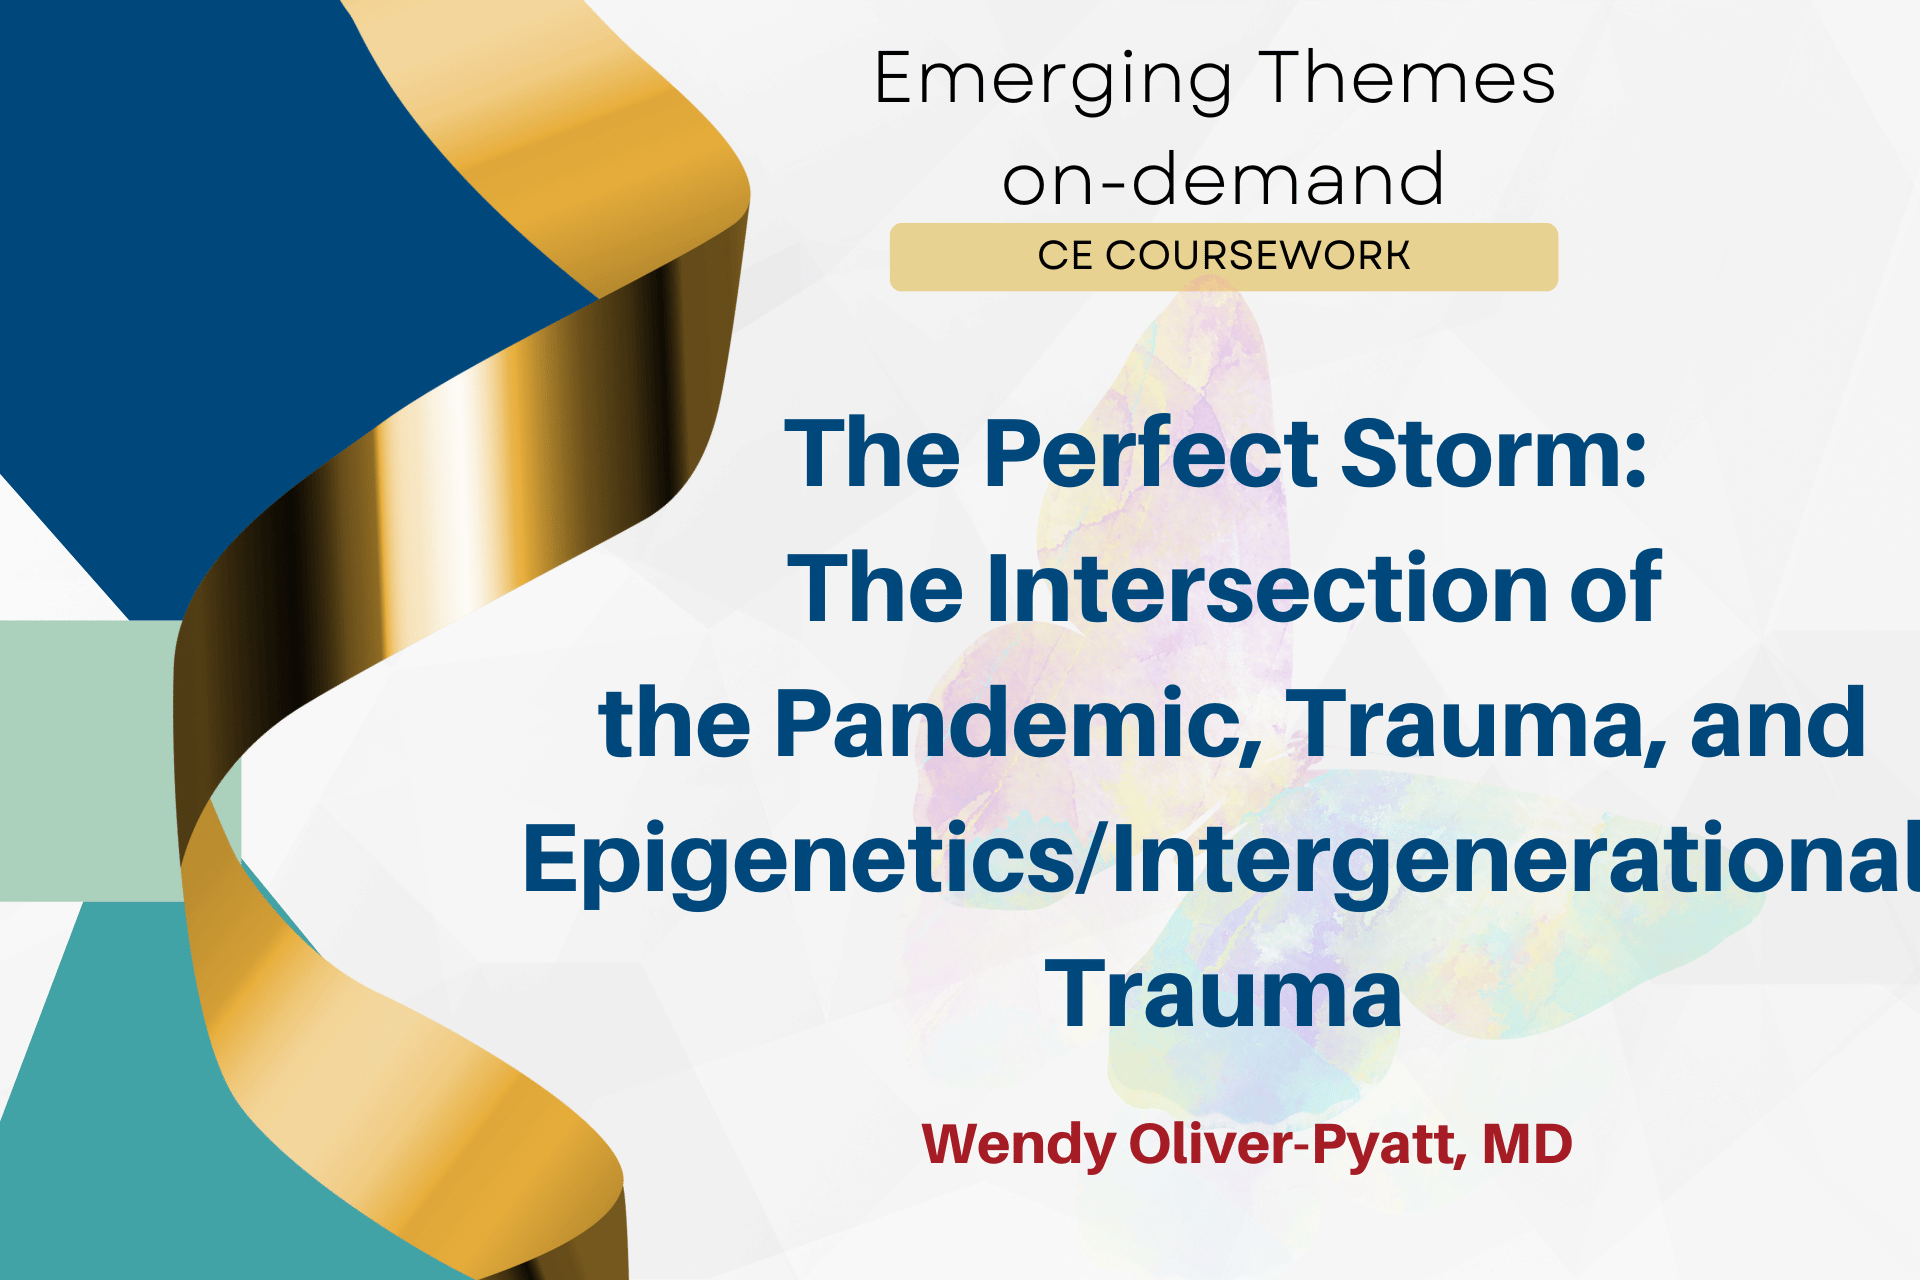 The Perfect Storm: The Intersection of the Pandemic, Trauma, and Epigenetics/Intergenerational Trauma in the Mental Health and Eating Disorder Epidemic